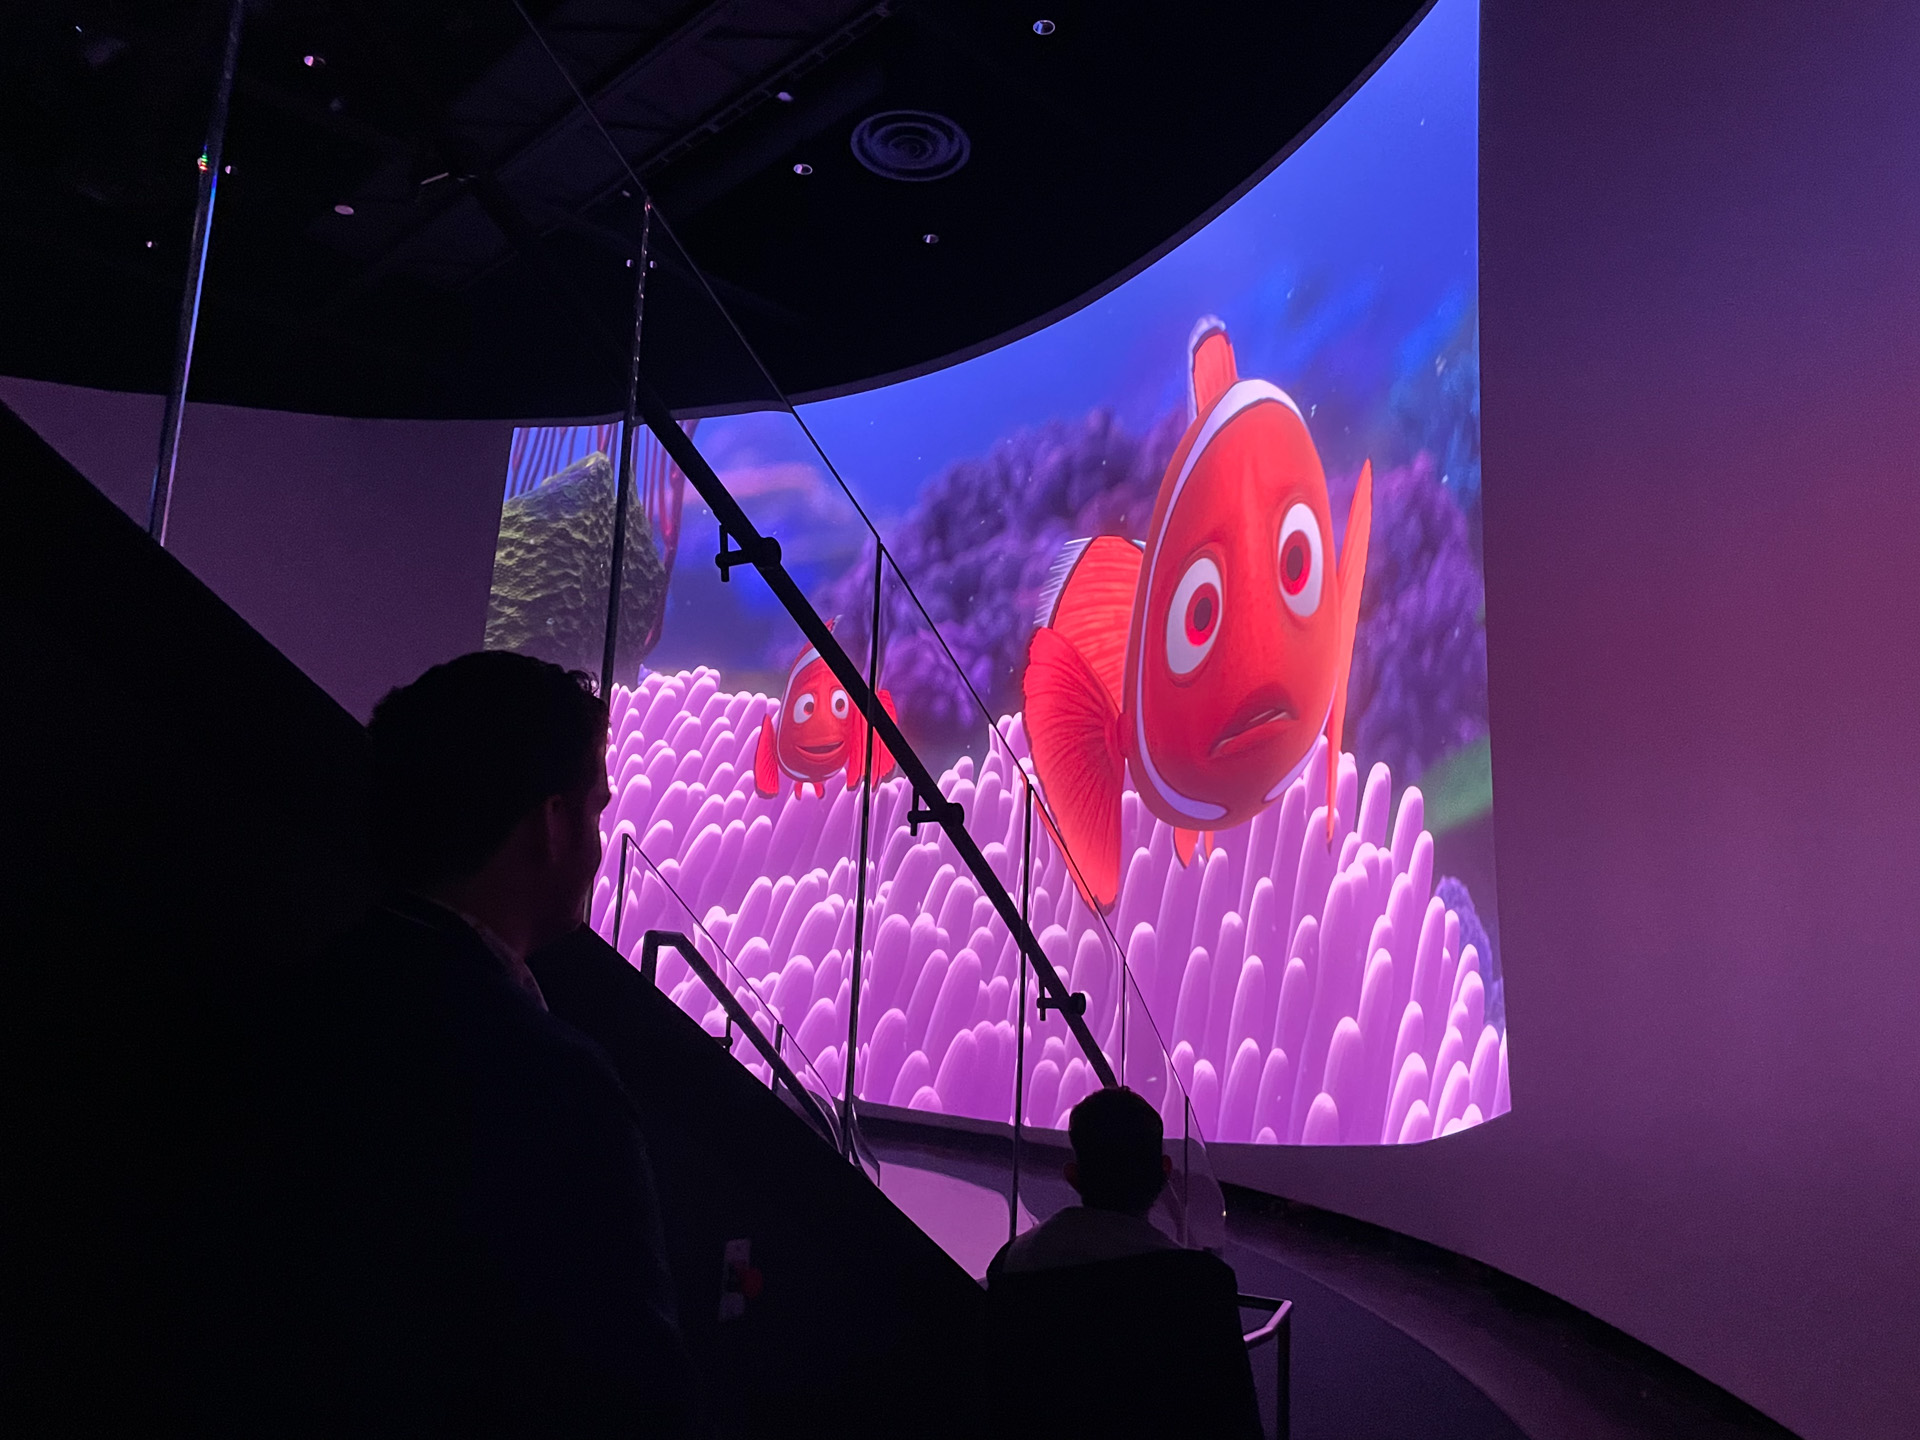 Marlin takes over the huge wrap-around screen during a scene from Finding Nemo as guests sit on the edge of their seats, ready to see the action unfold.